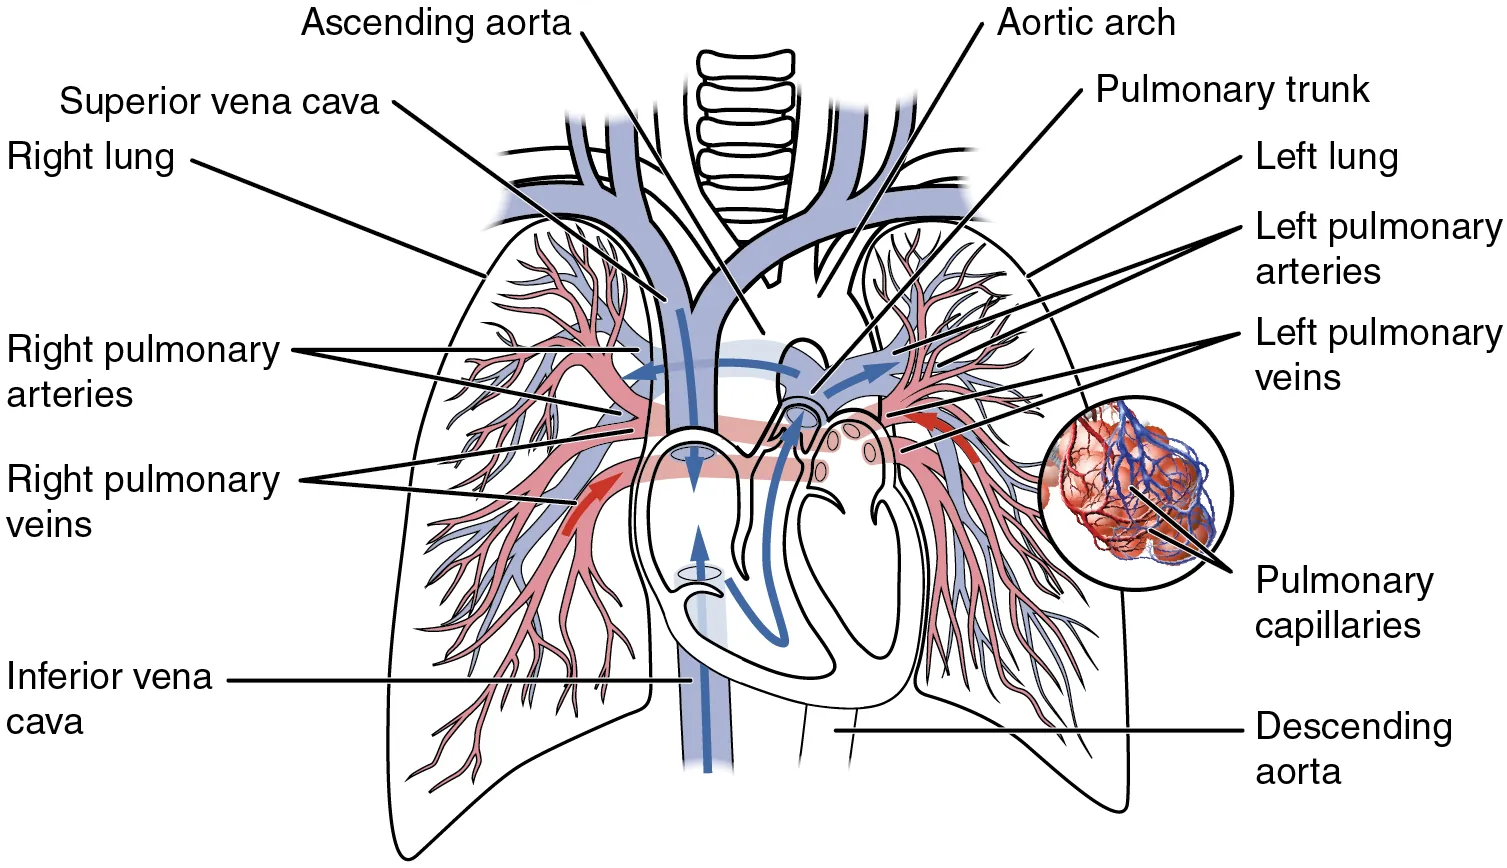 This diagram shows the network of blood vessels in the lungs.